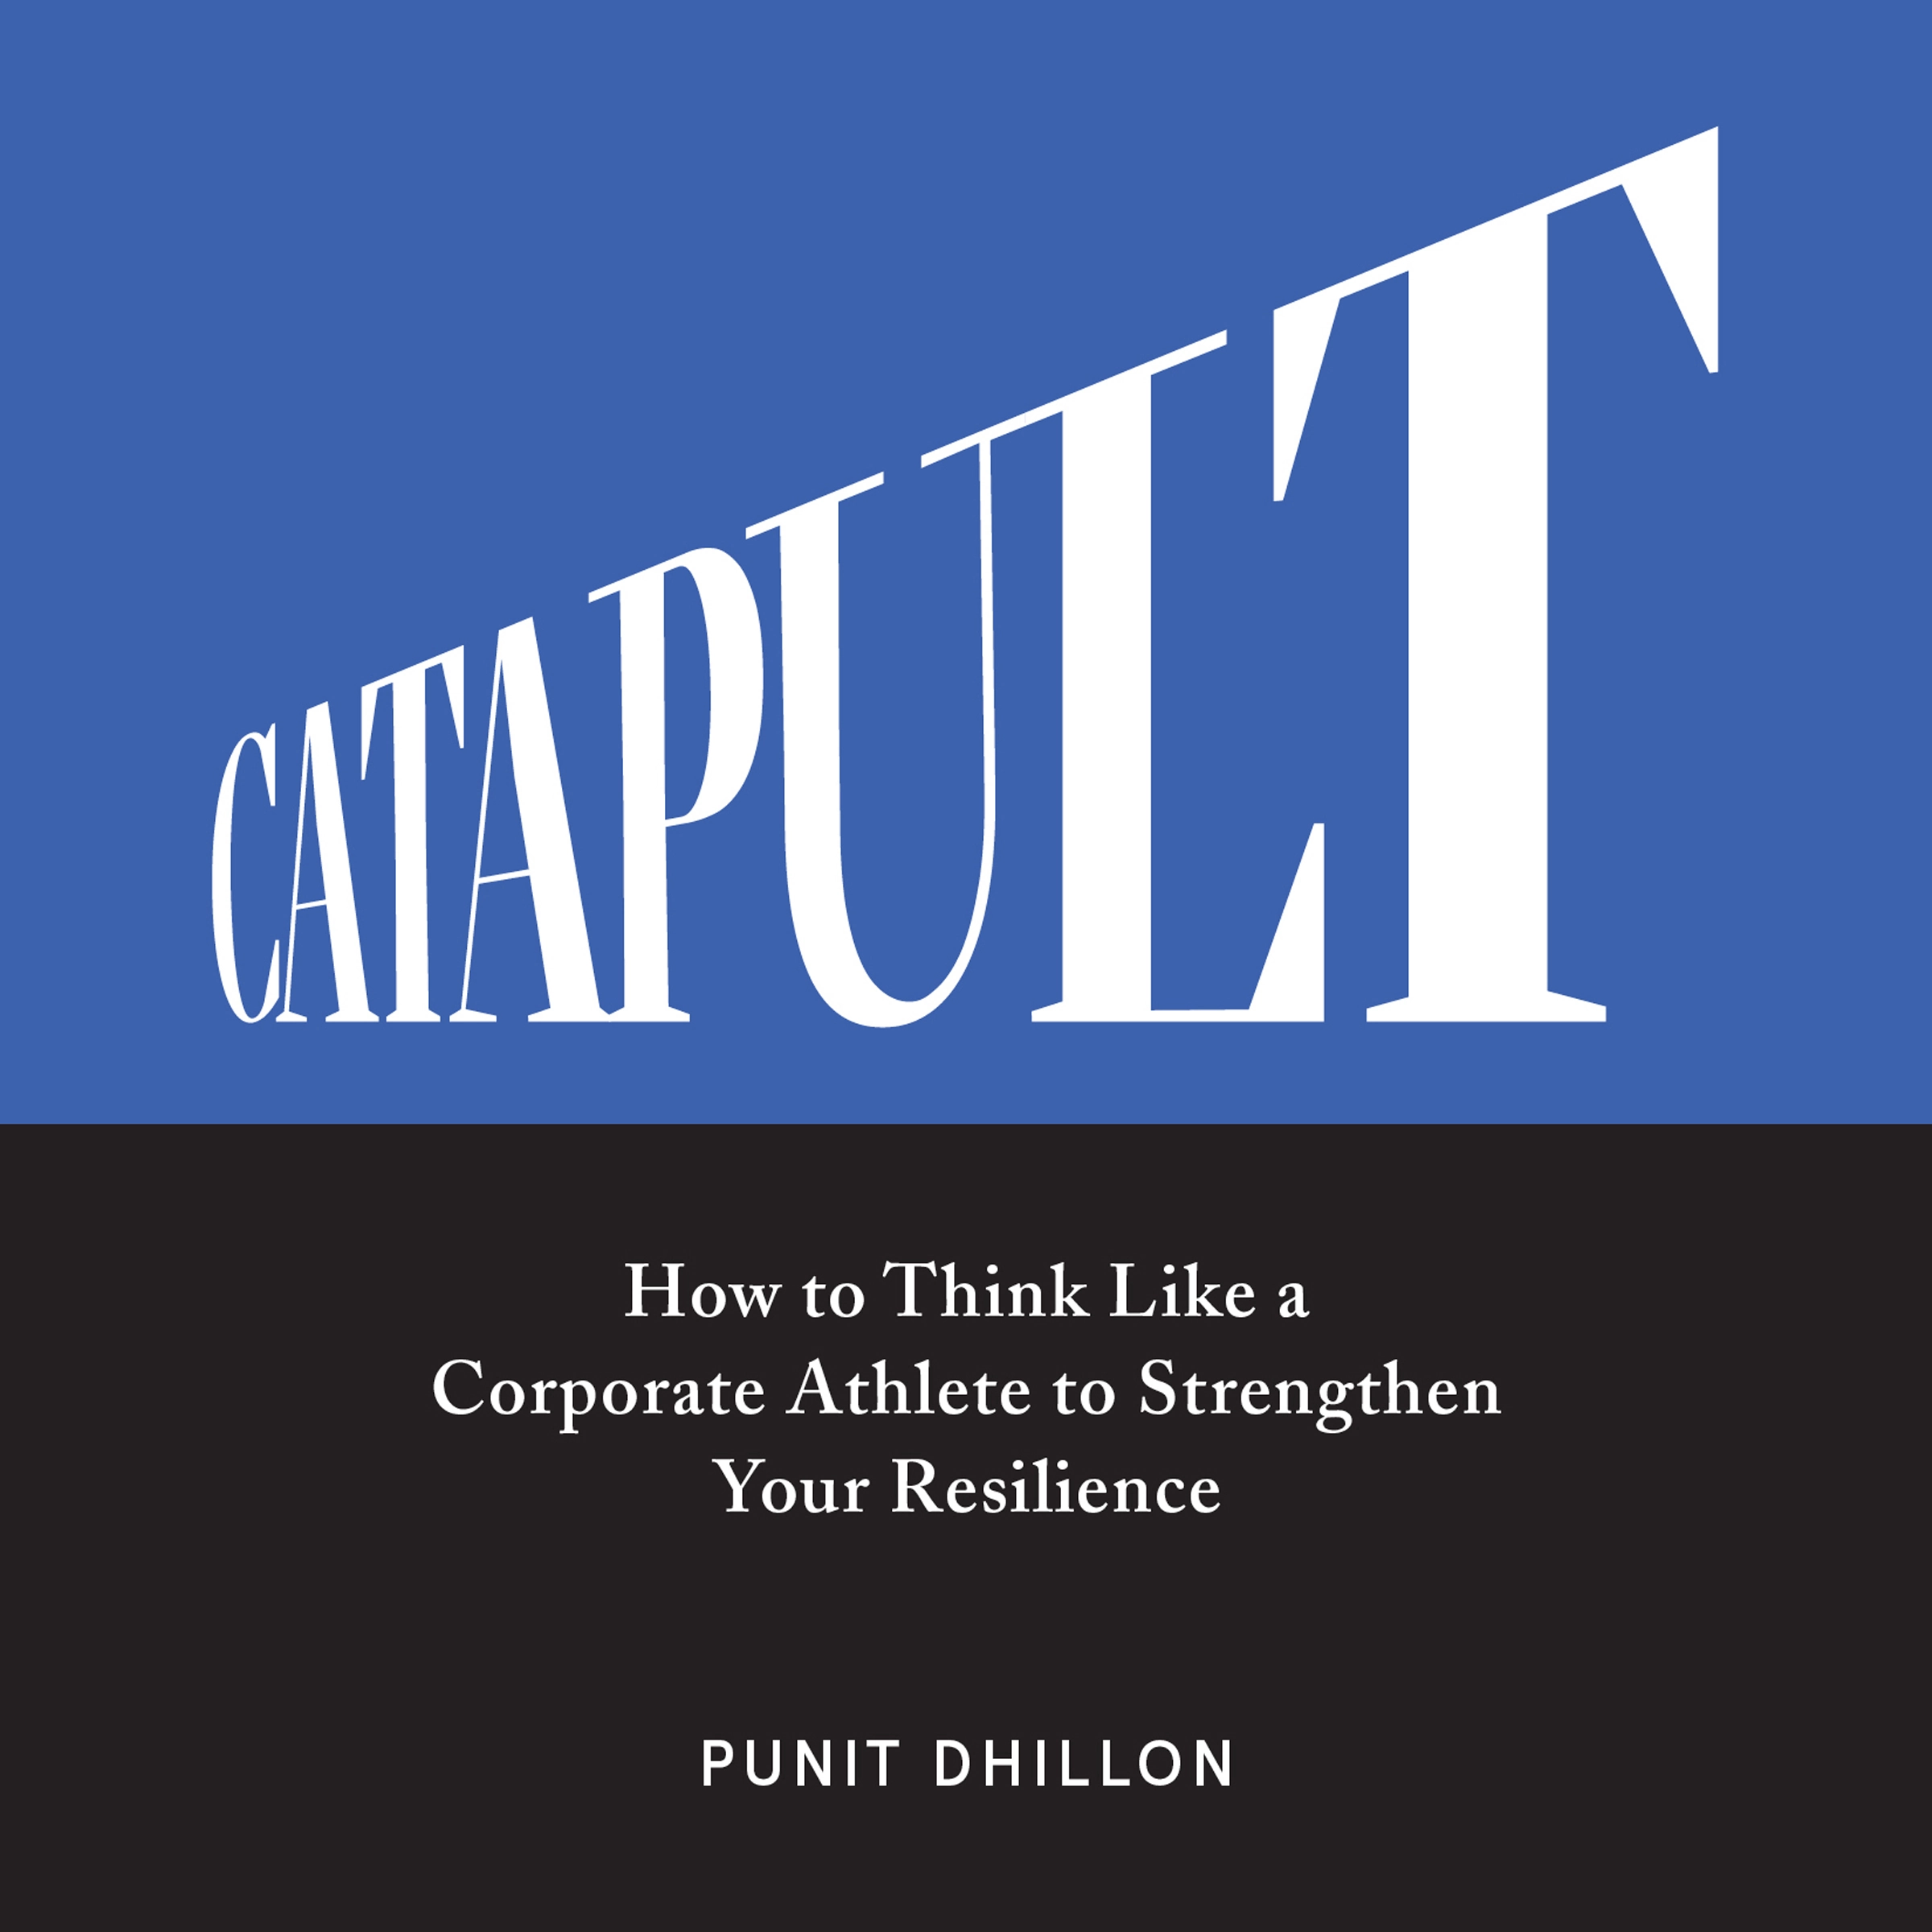 Catapult by Punit Dhillon Audiobook